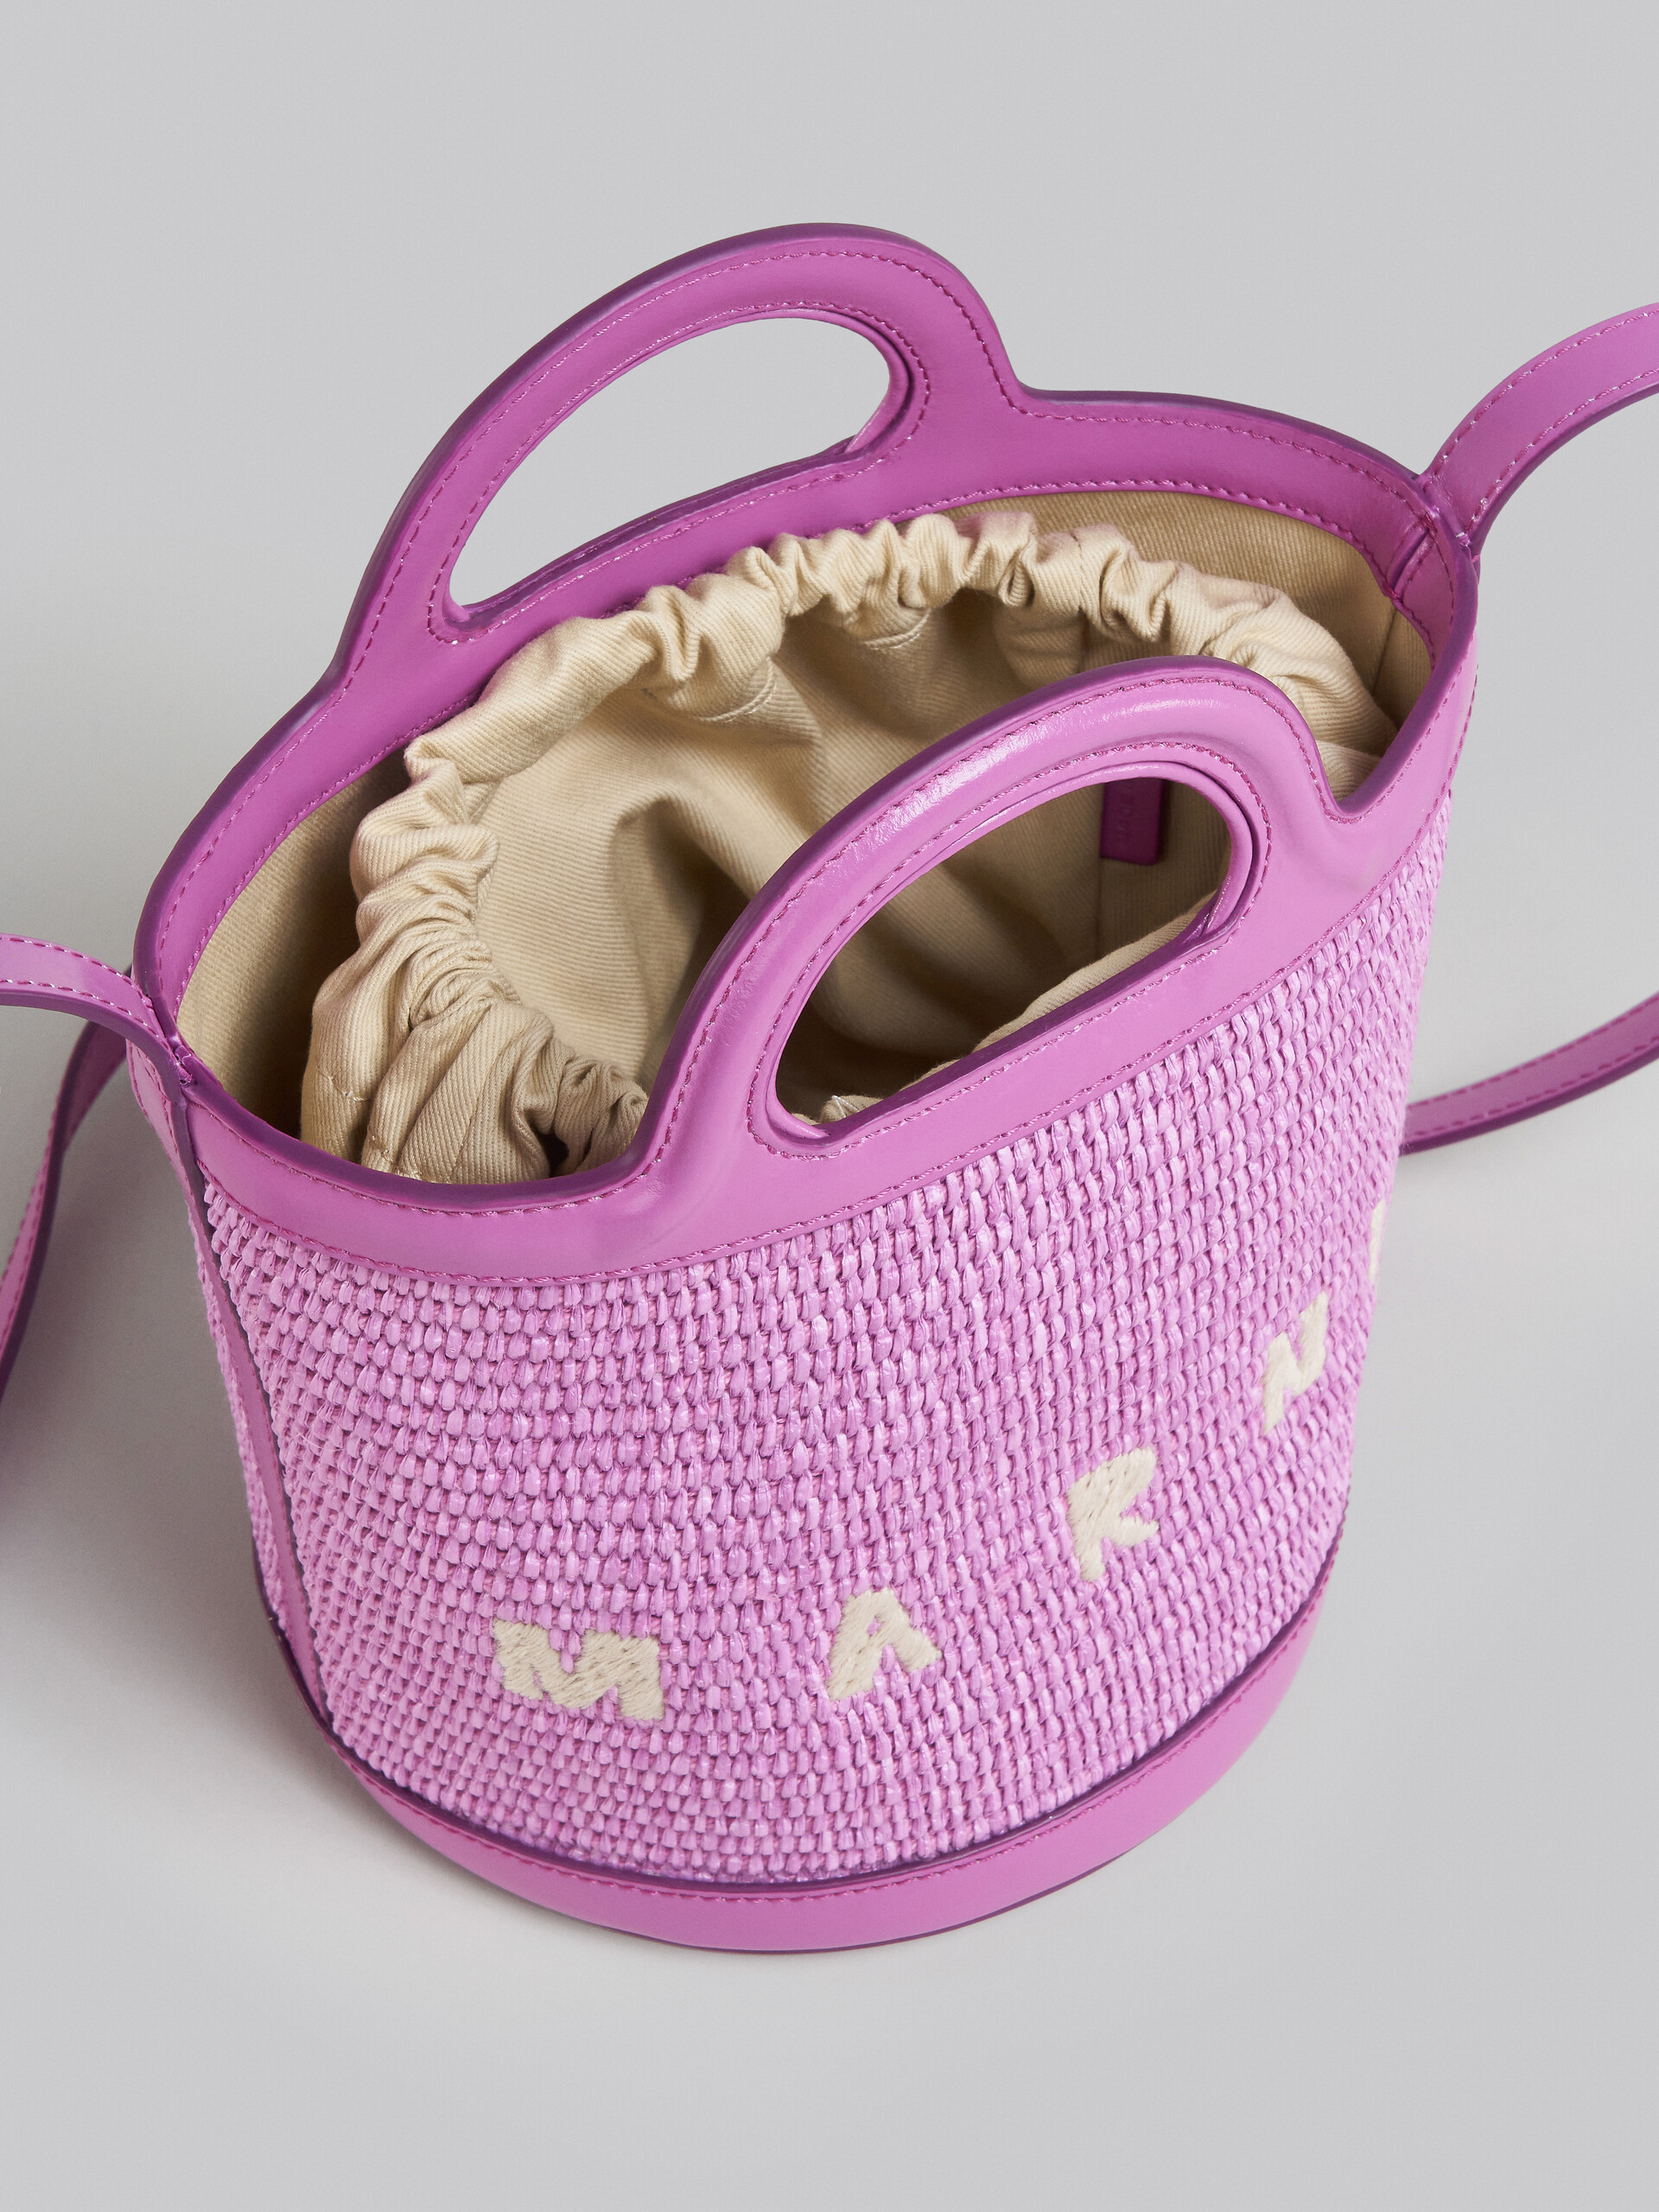 Tropicalia Small Bucket Bag in lilac leather and raffia - Shoulder Bags - Image 4